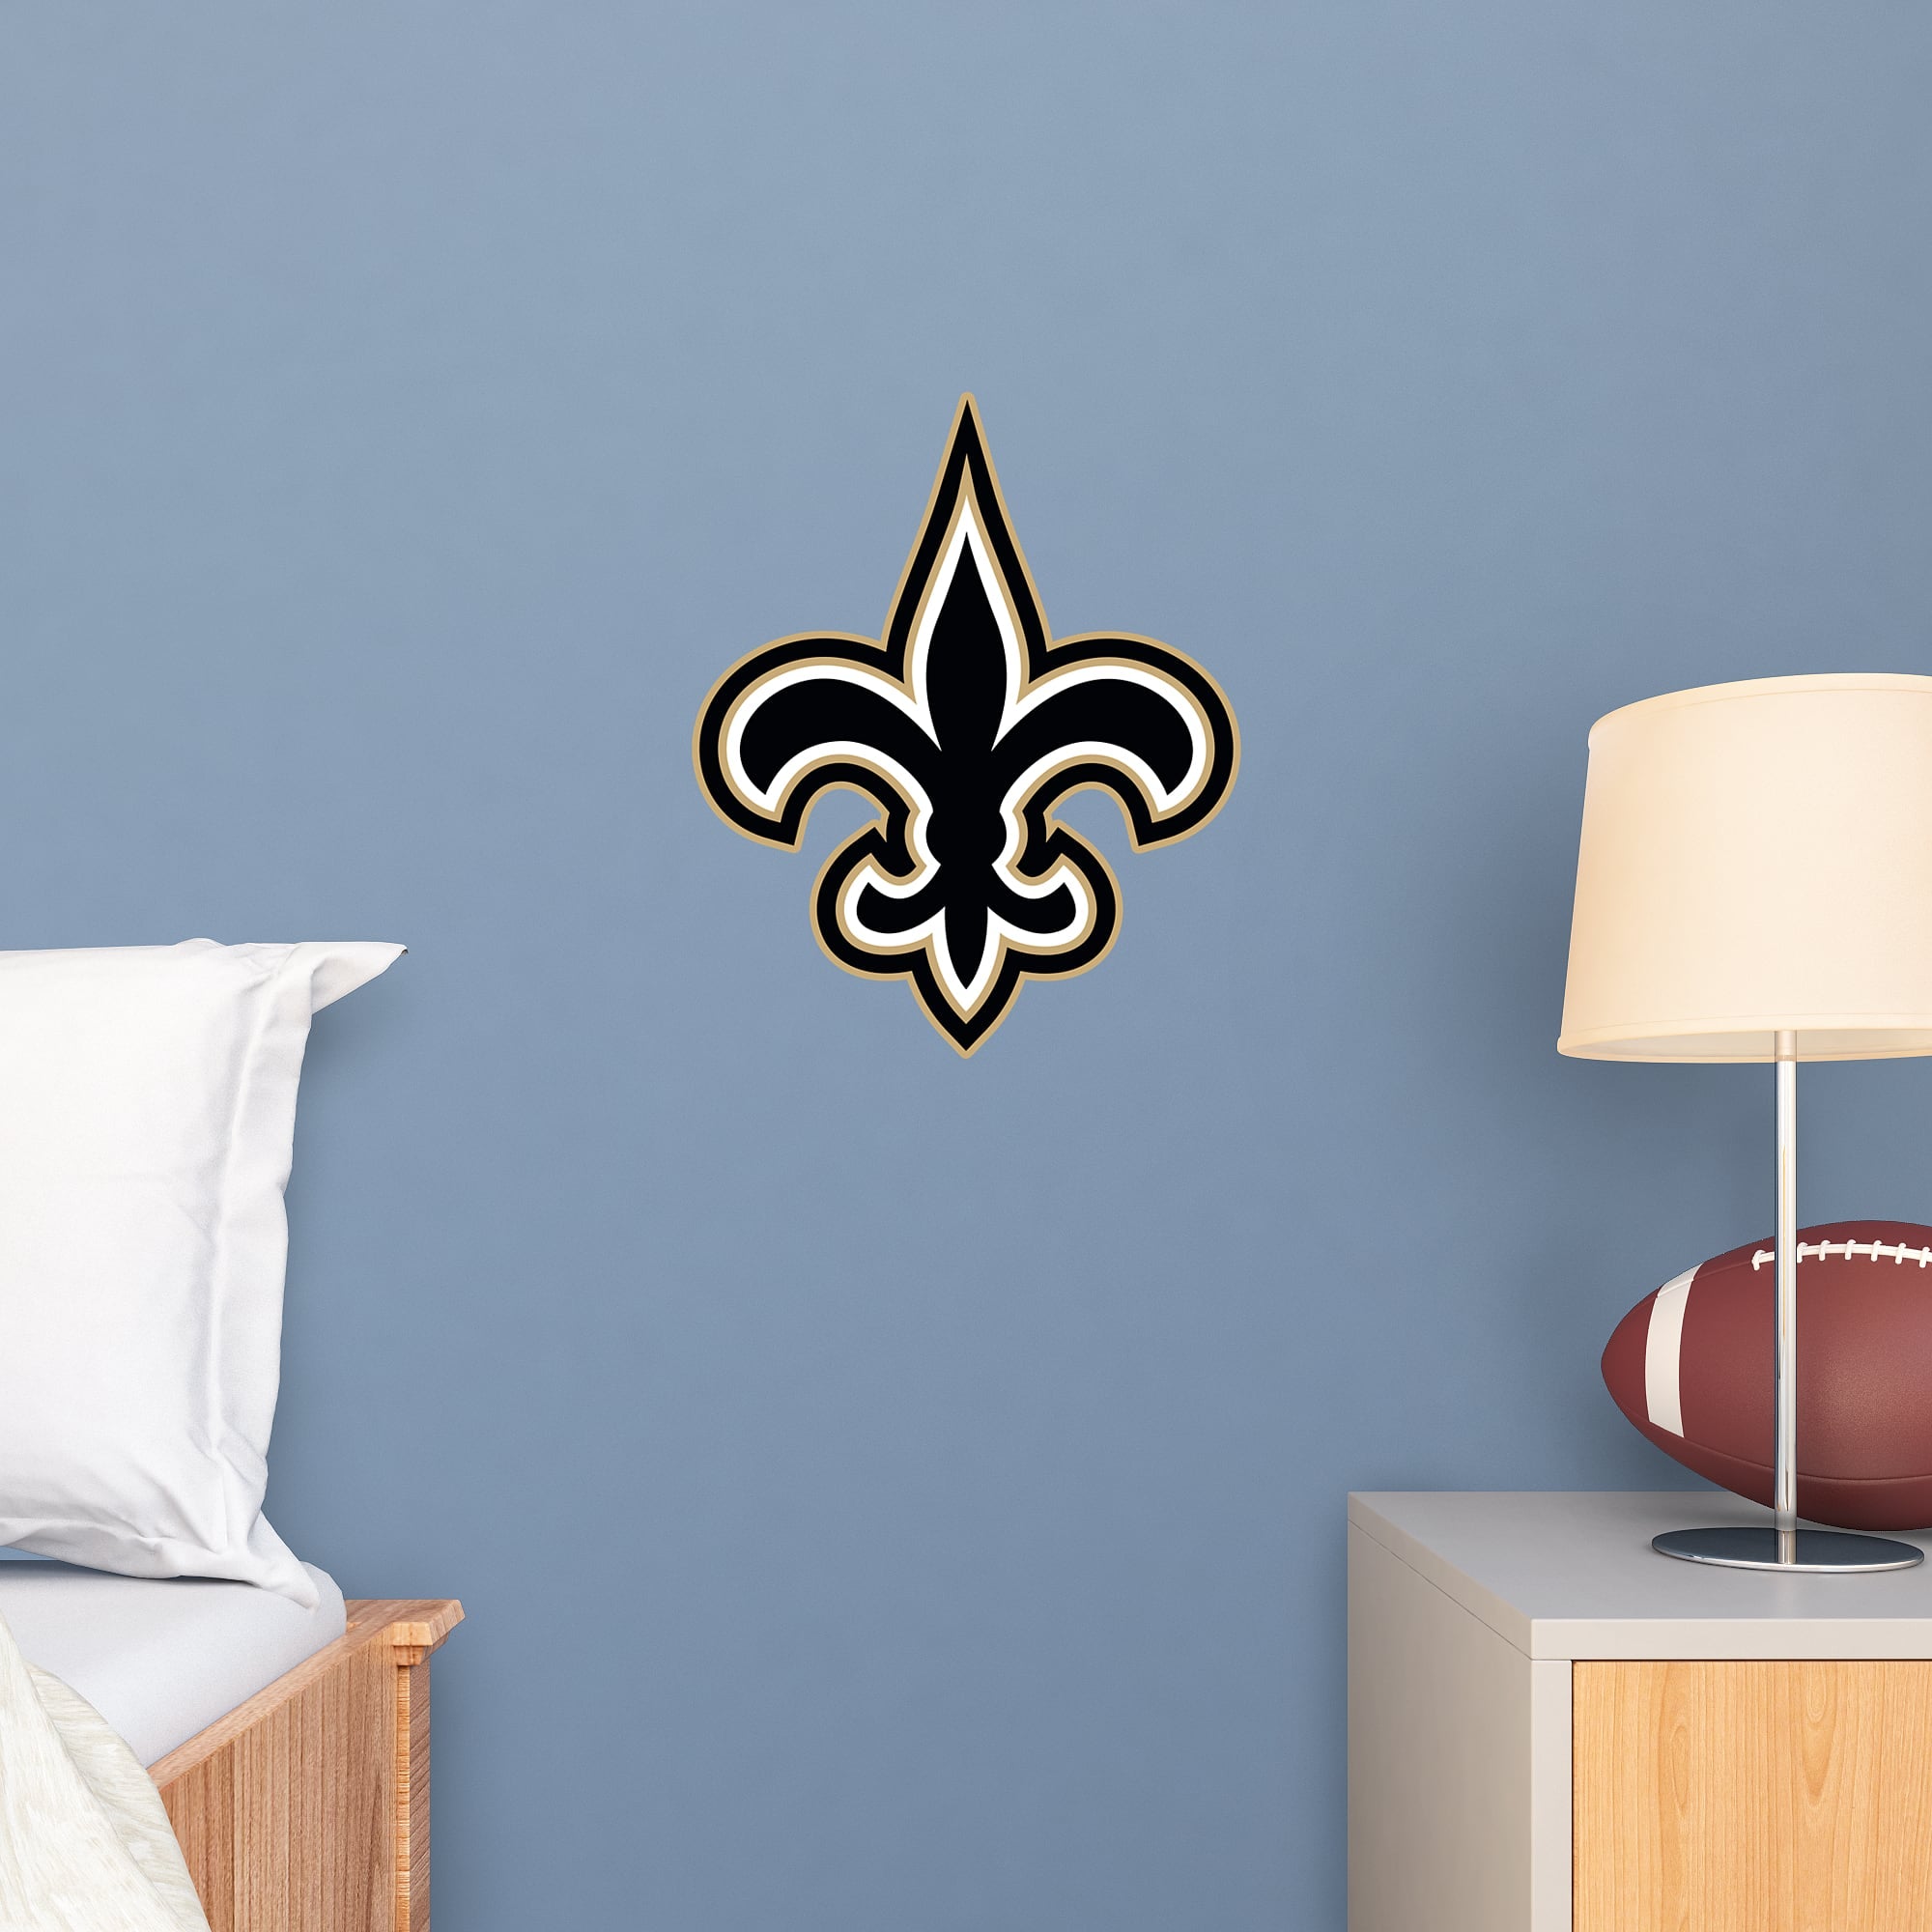 New Orleans Saints: Logo - Officially Licensed NFL Removable Wall Decal Large by Fathead | Vinyl